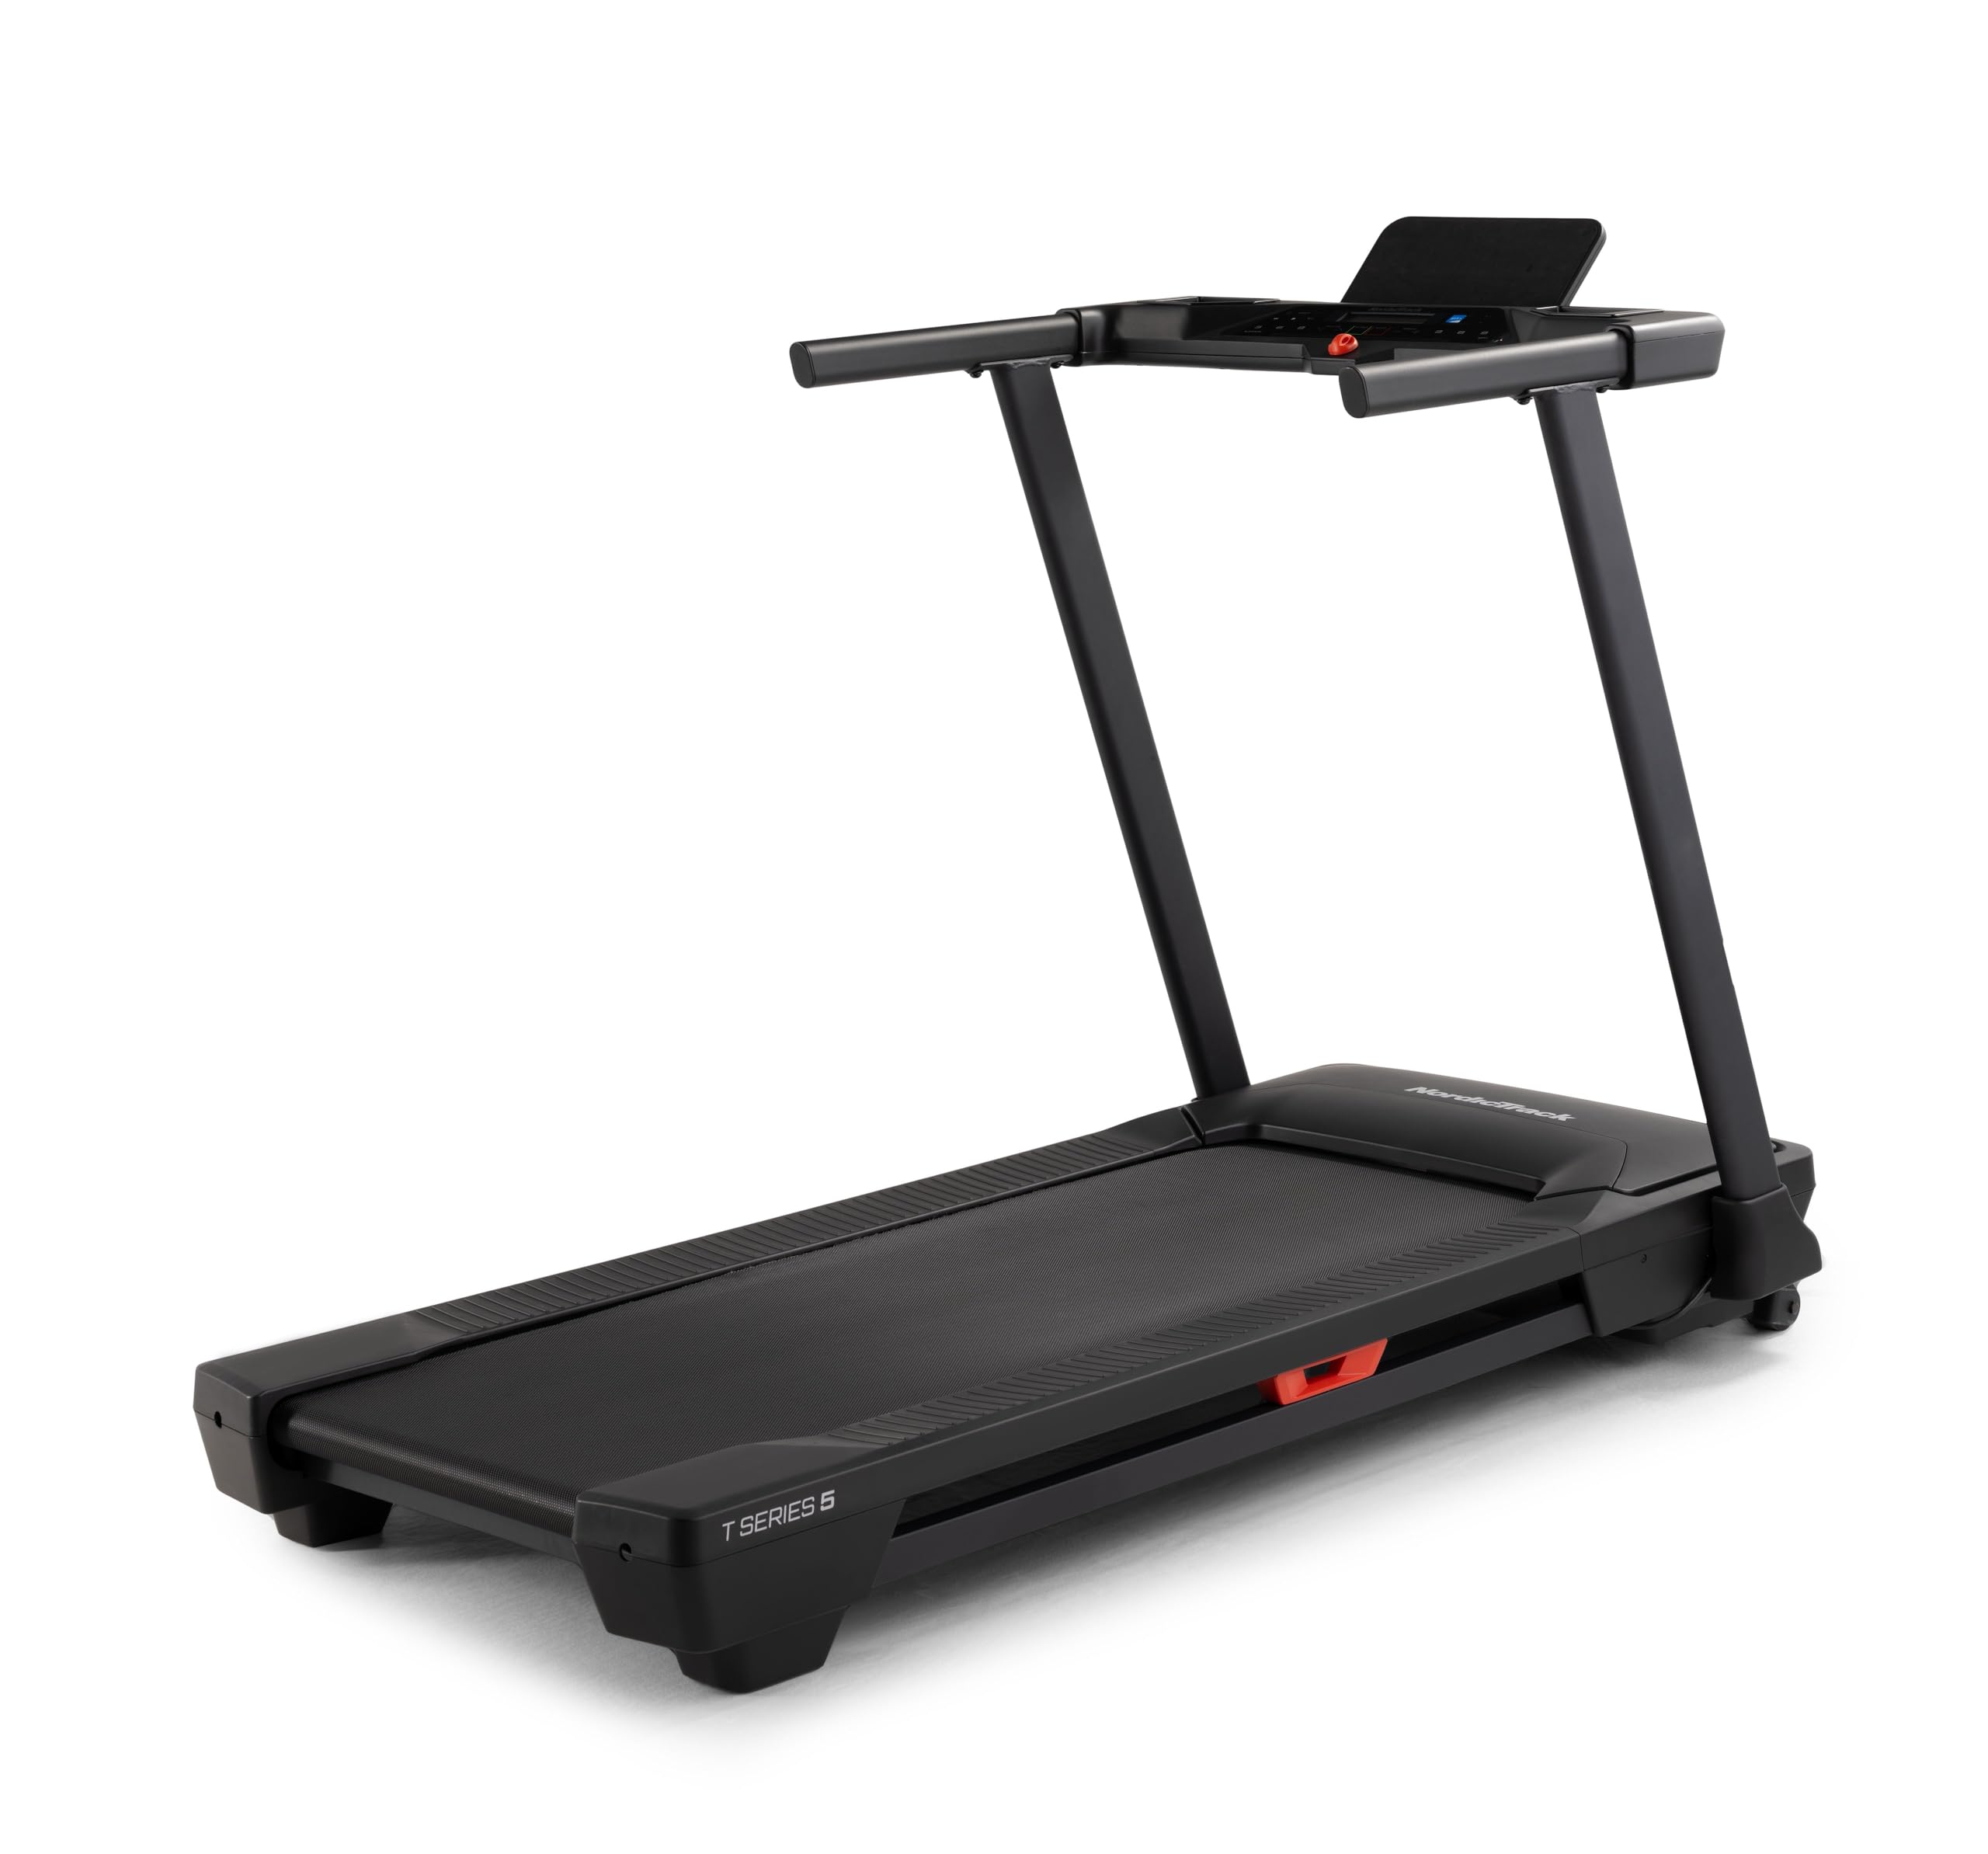 NordicTrack T Series_ Perfect Treadmills for Home Use, Walking Treadmill with Incline, Bluetooth Enabled, 300 lbs User Capacity>